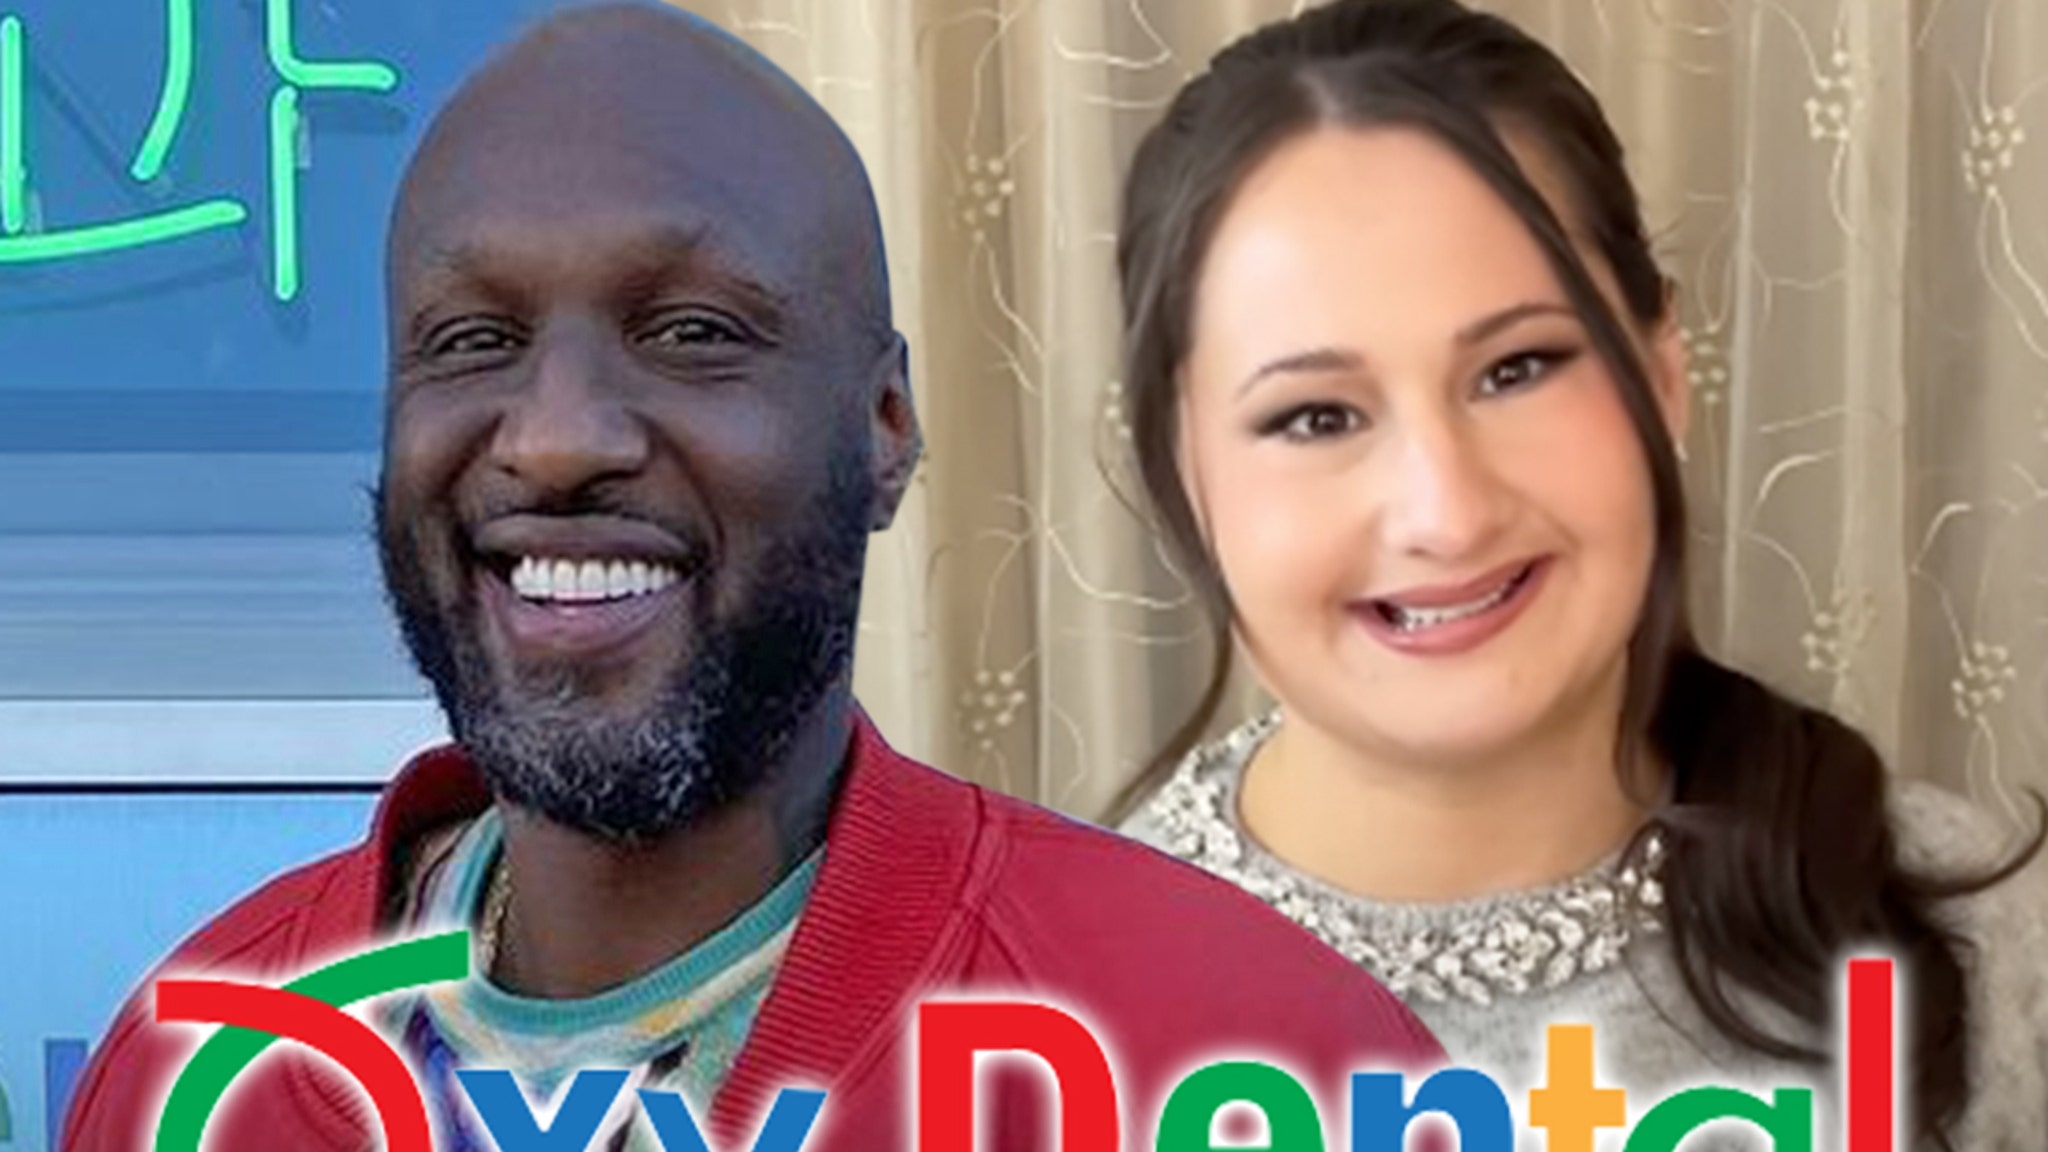 Gypsy Rose Blanchard Offered Free Smile Makeover, Courtesy of Lamar Odom